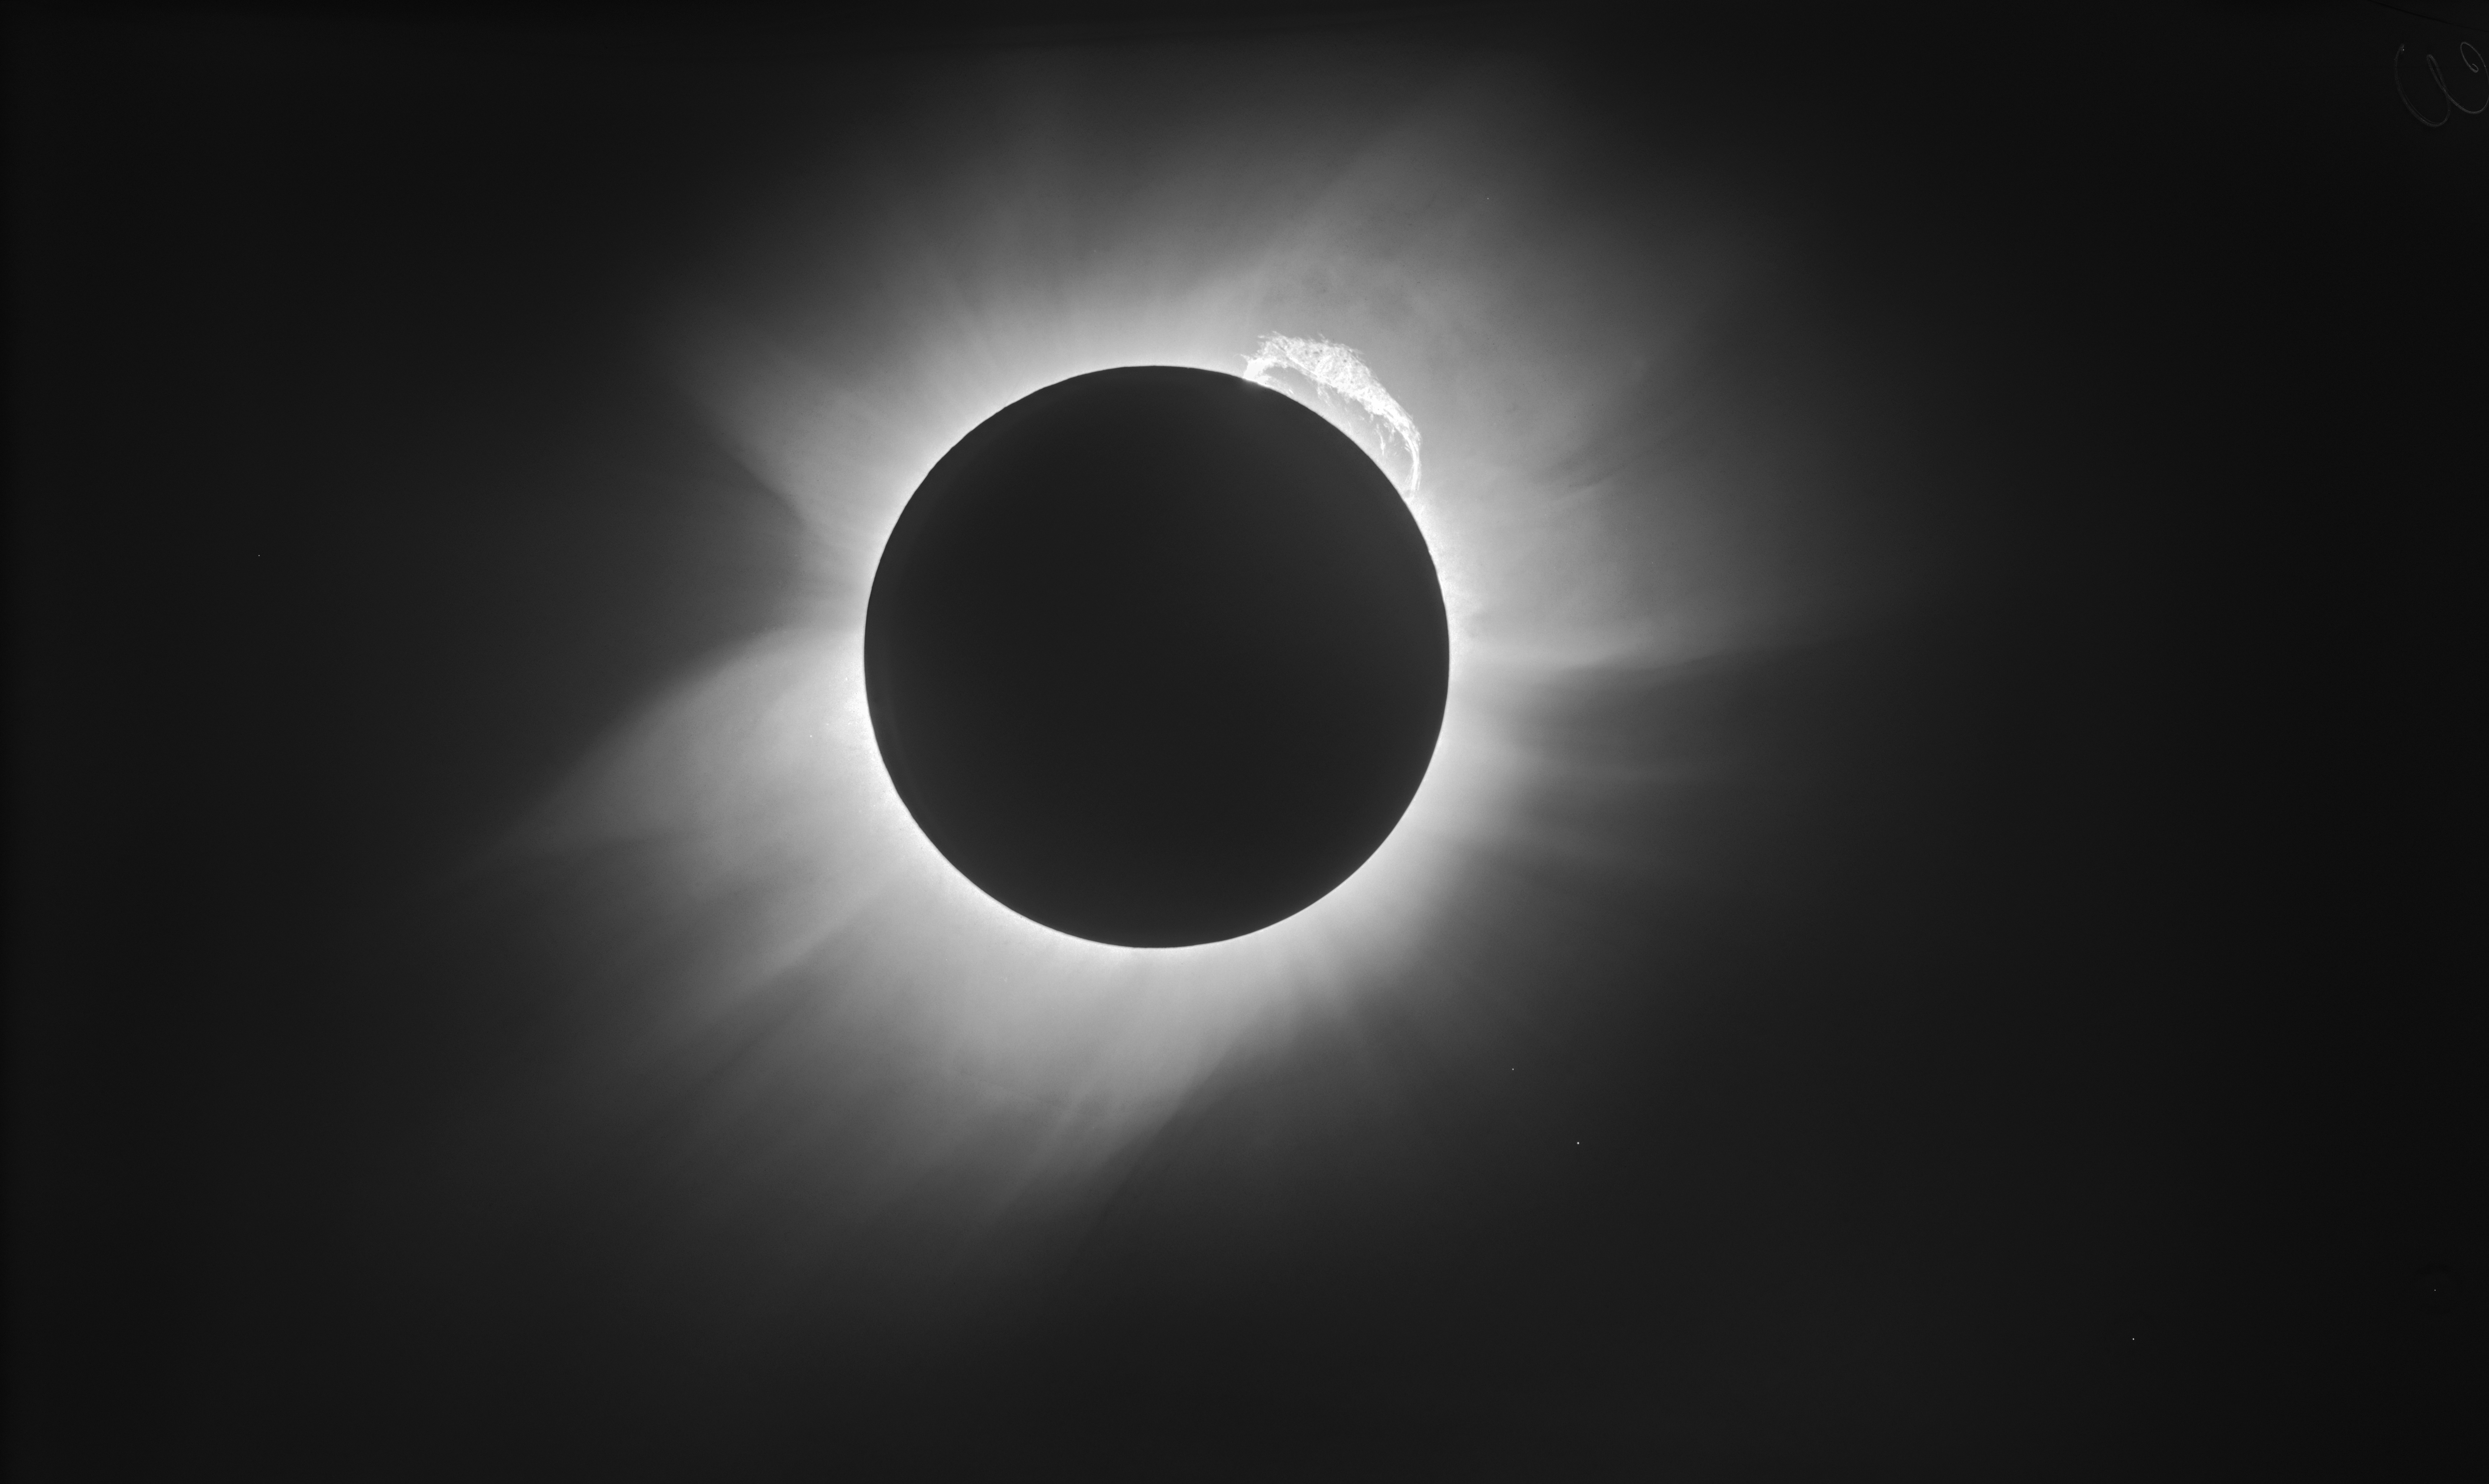 This image may not be used by or to promote the arms, nuclear power or tobacco industries or any religious organisation, or in any discriminatory way, or to imply the endorsement by ESO of any product, service or activity   1919 solar eclipse. The original image on glass photographic plate produced by the British astronomers Arthur Eddington (1882-1944) and Andrew Crommelin (1865-1939) has been processed here with modern techniques. These include image restoration, noise reduction and removal of artefacts. The image reveals details in the solar corona, a giant prominence emerging from the upper right part of the Sun, and stars in the constellation of Taurus that were used to confirm Einstein's general relativity predictions. Eddington and Crommelin travelled to locations at which the eclipse would be total, Eddington to West Africa and Crommelin to the Brazilian town of Sobral. By measuring the positions of stars during the eclipse and comparing them to their positions at night, when the sun is not in the field of view, it was possible to determine that their light rays were bent while passing close to the Sun. A key observational test of Einstein's theory of relativity.